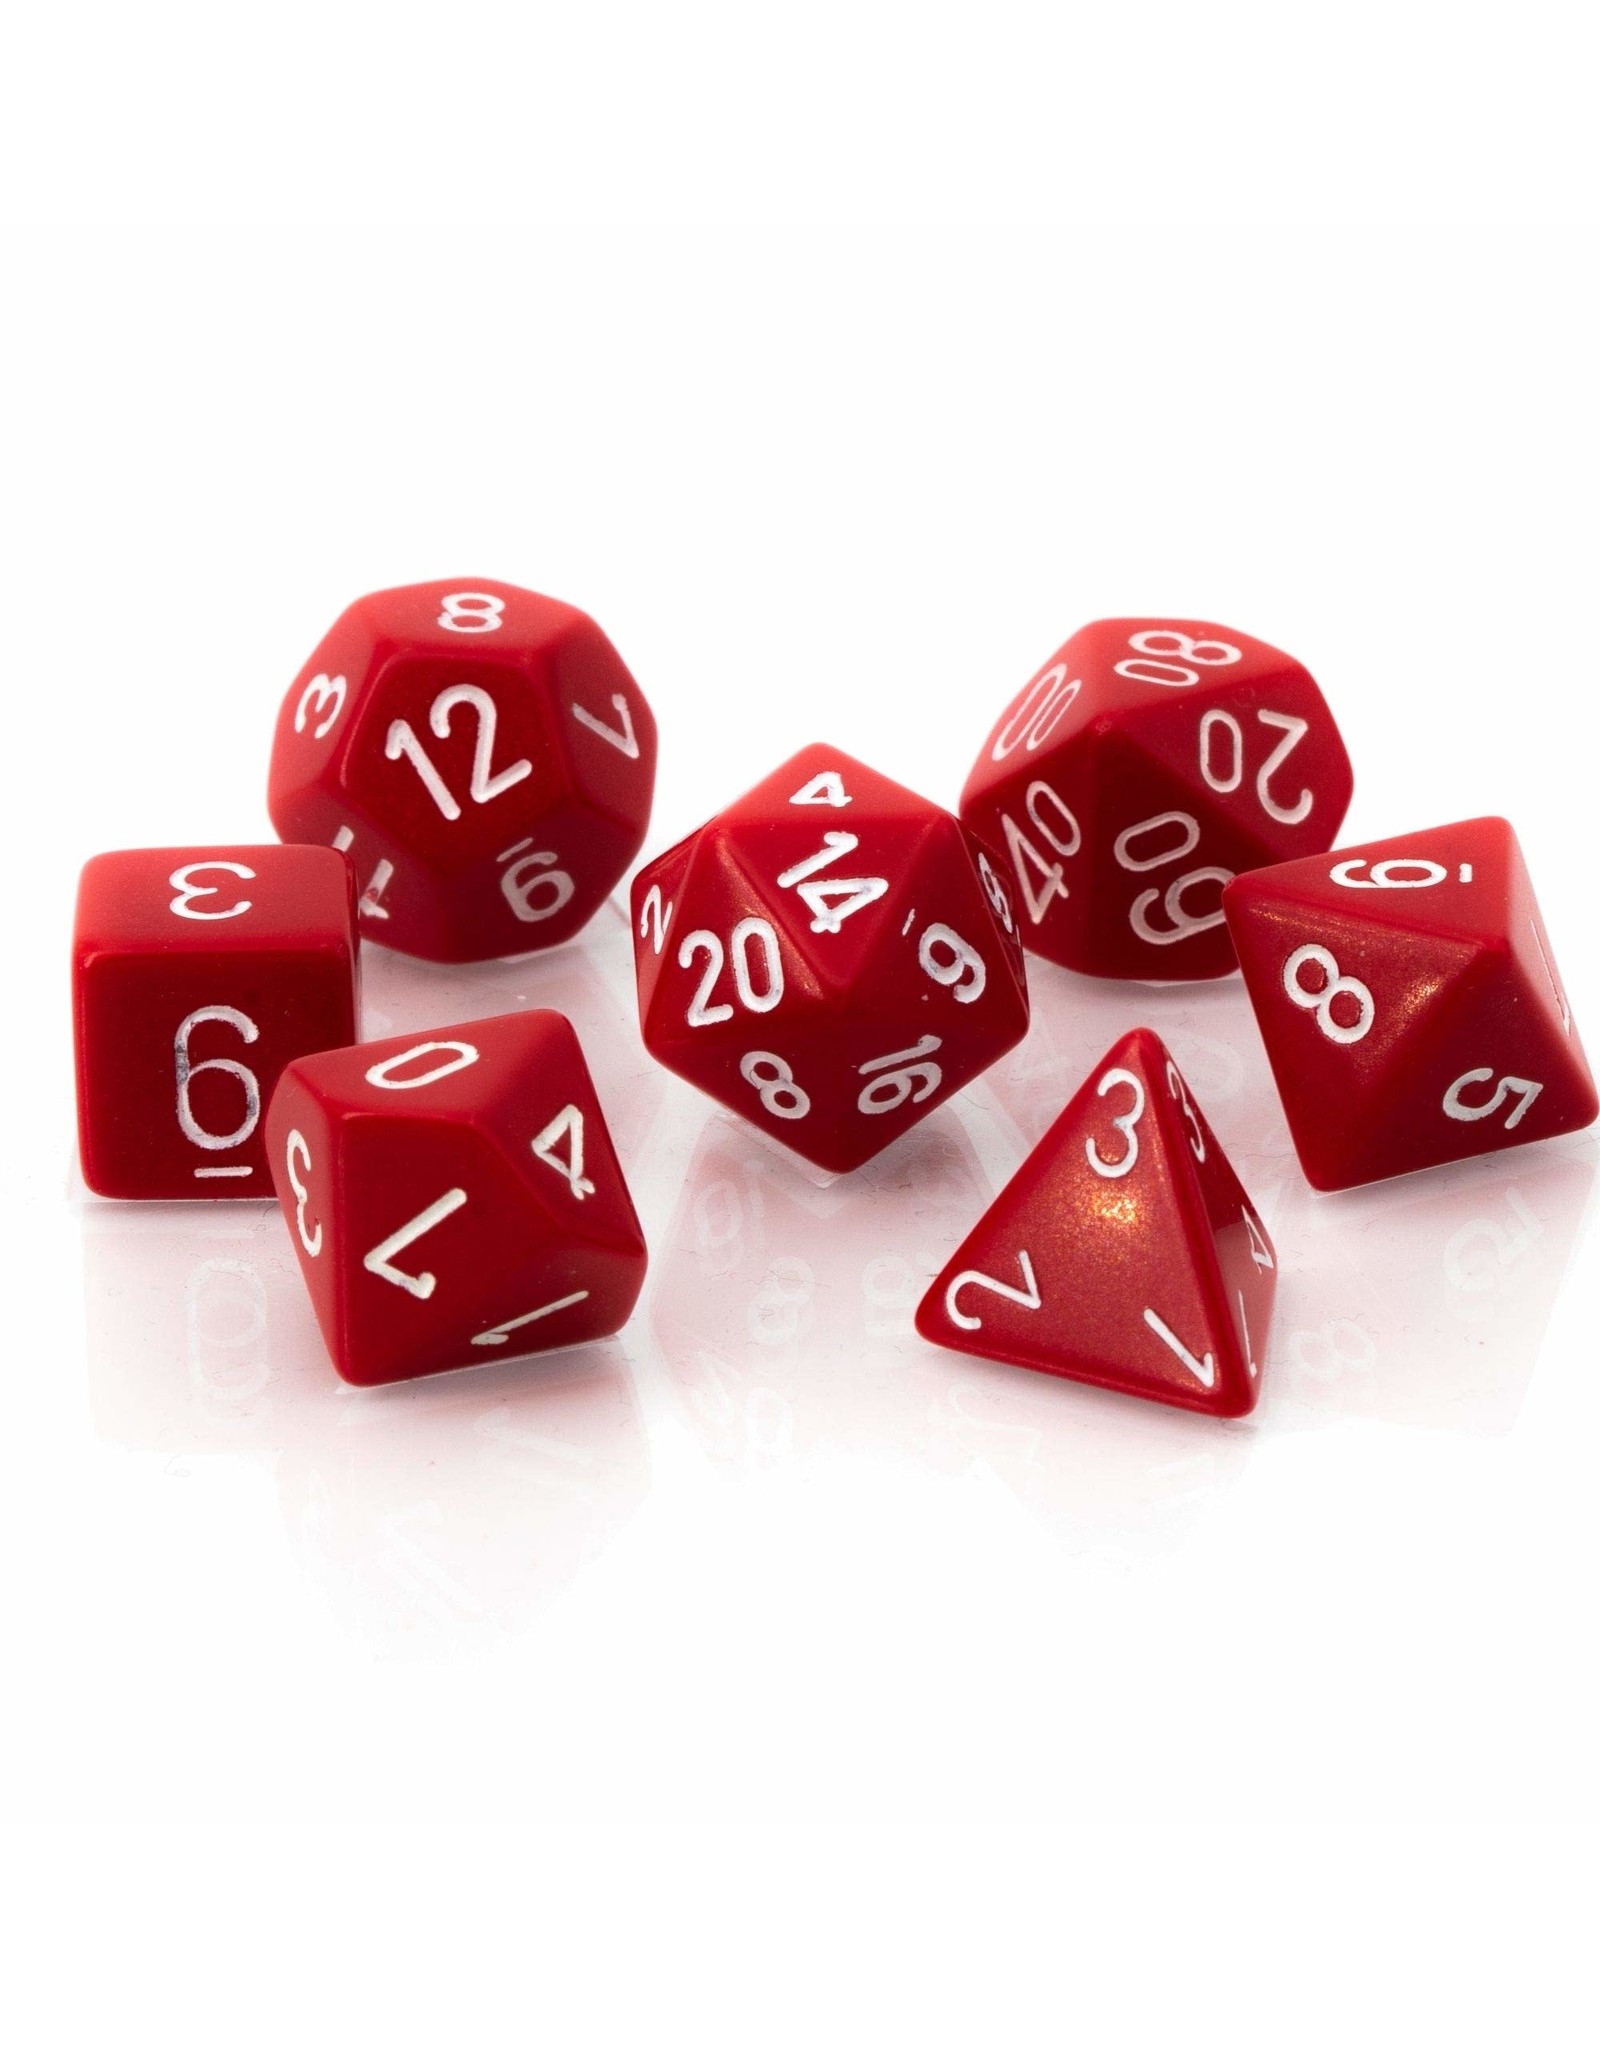 Chessex Opaque Red/White polyhedral 7-dice set